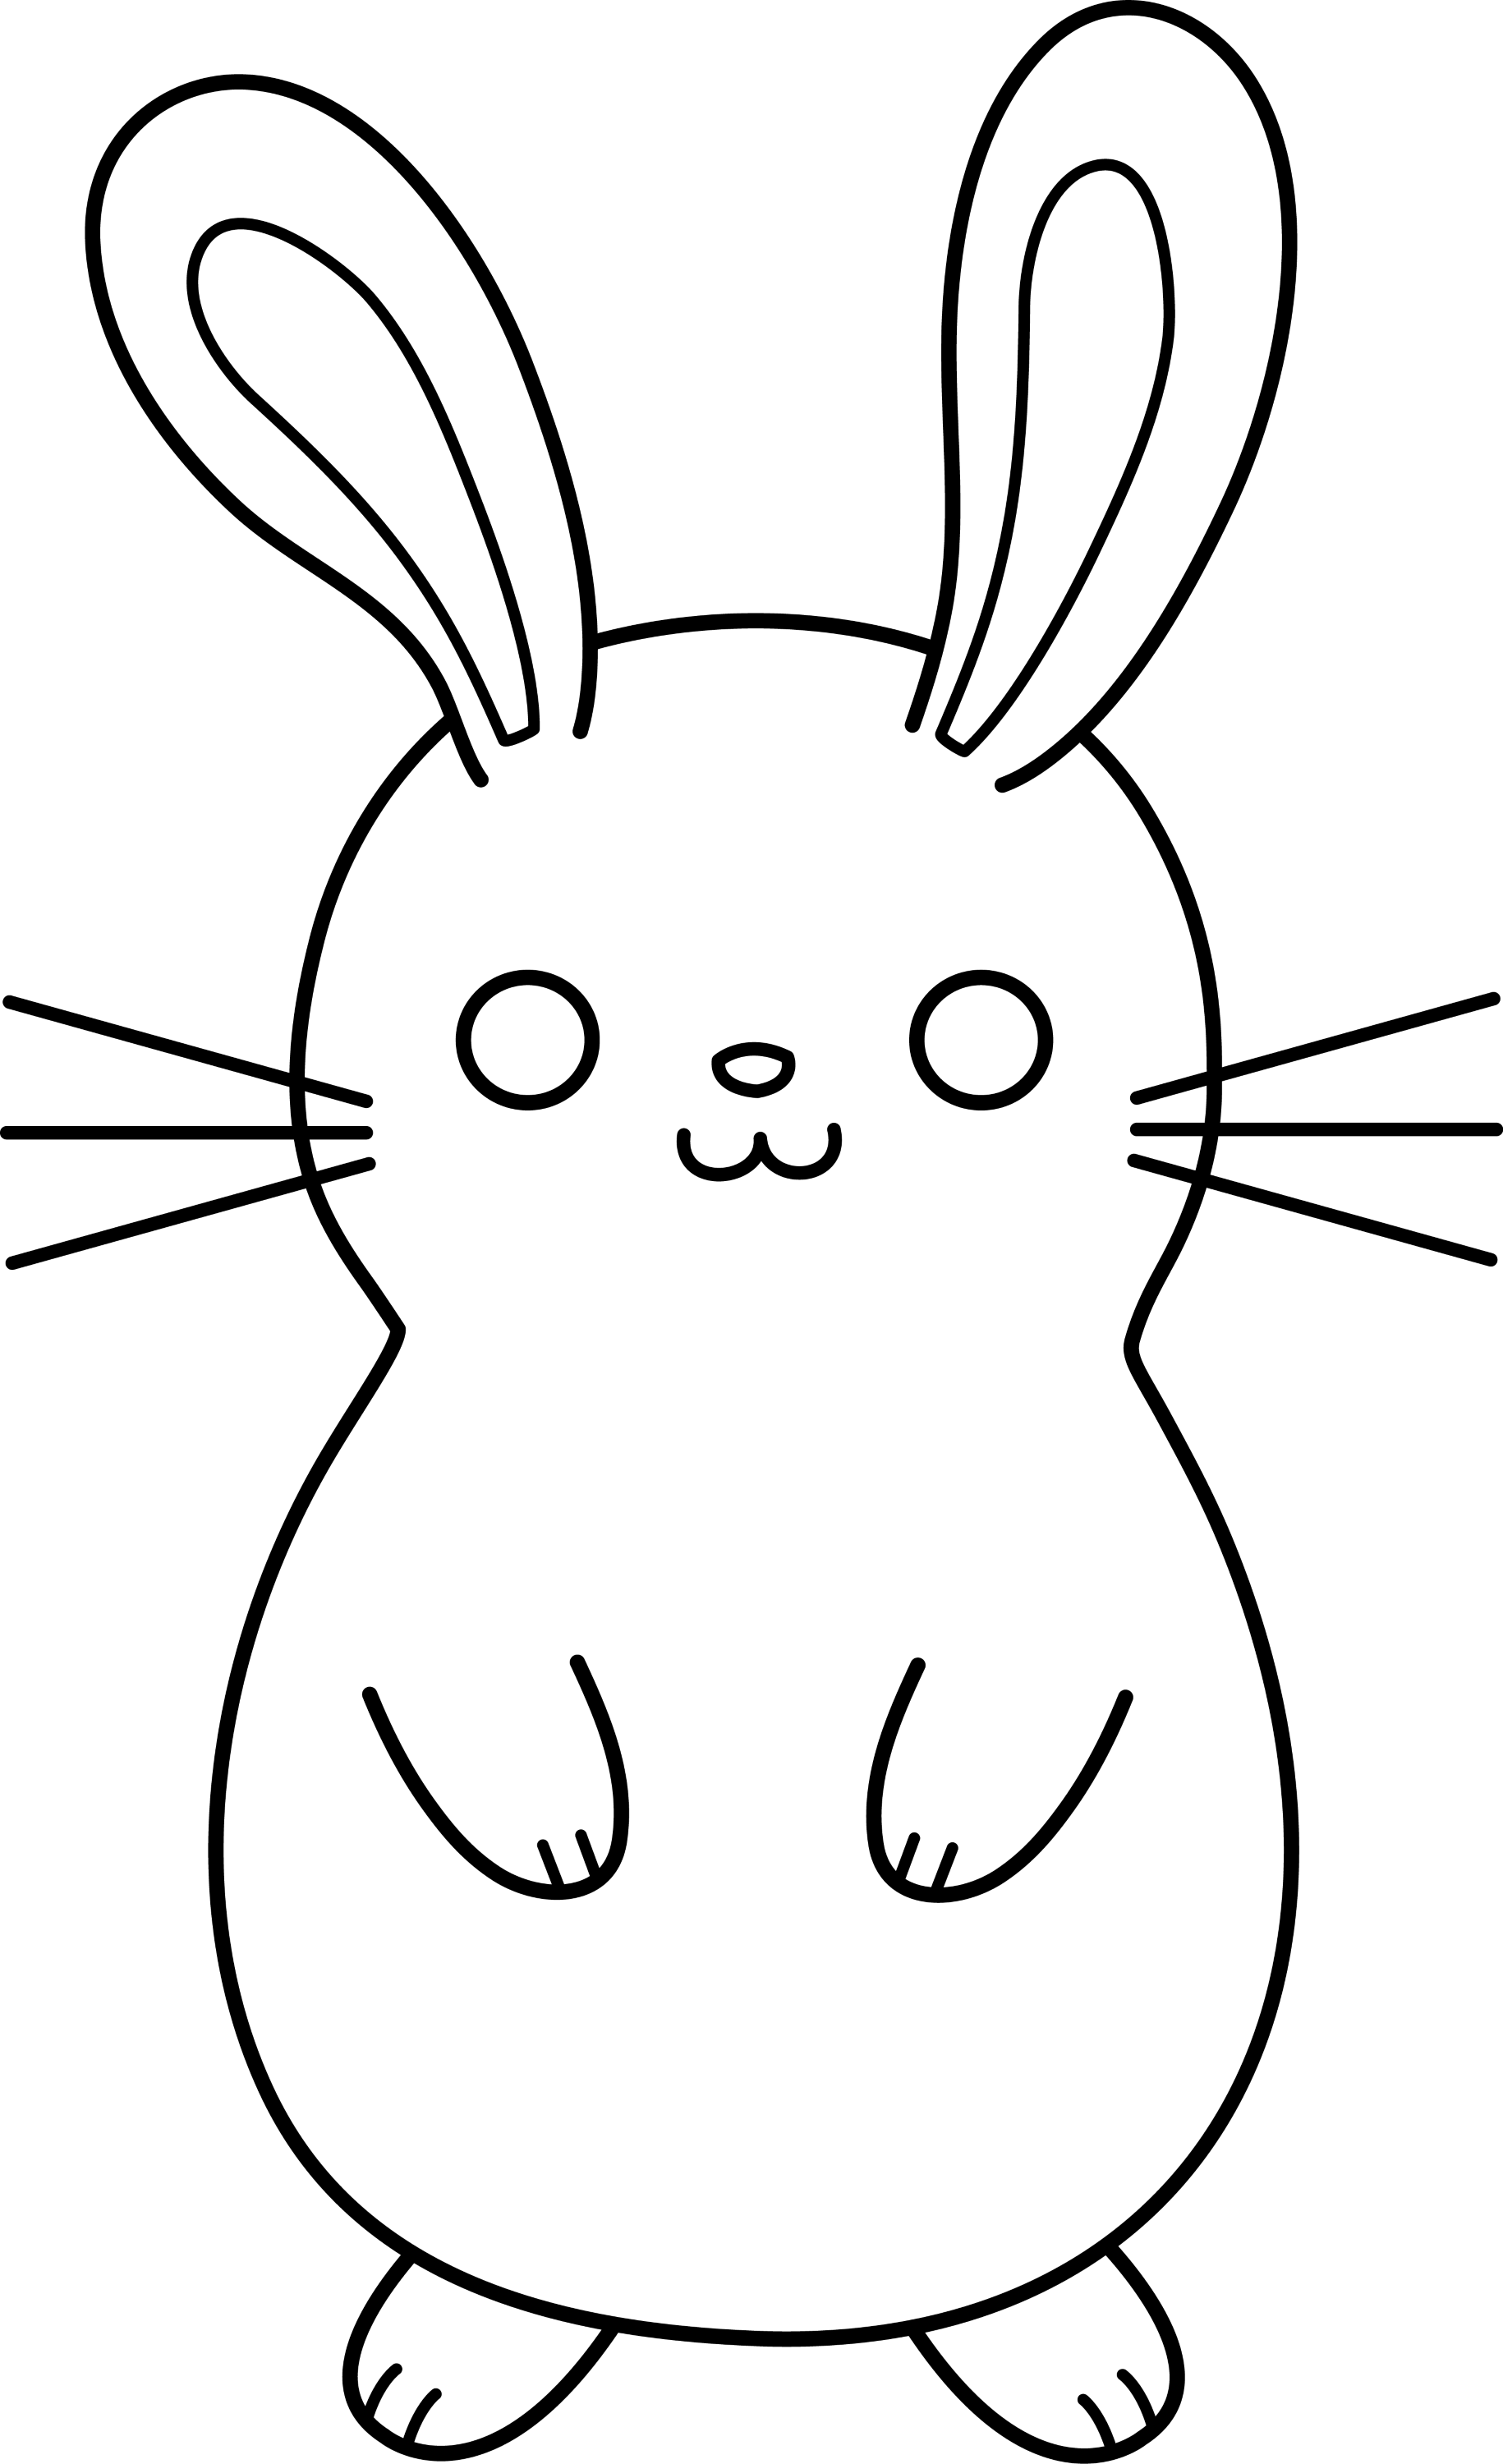 free black and white easter bunny clipart - photo #28